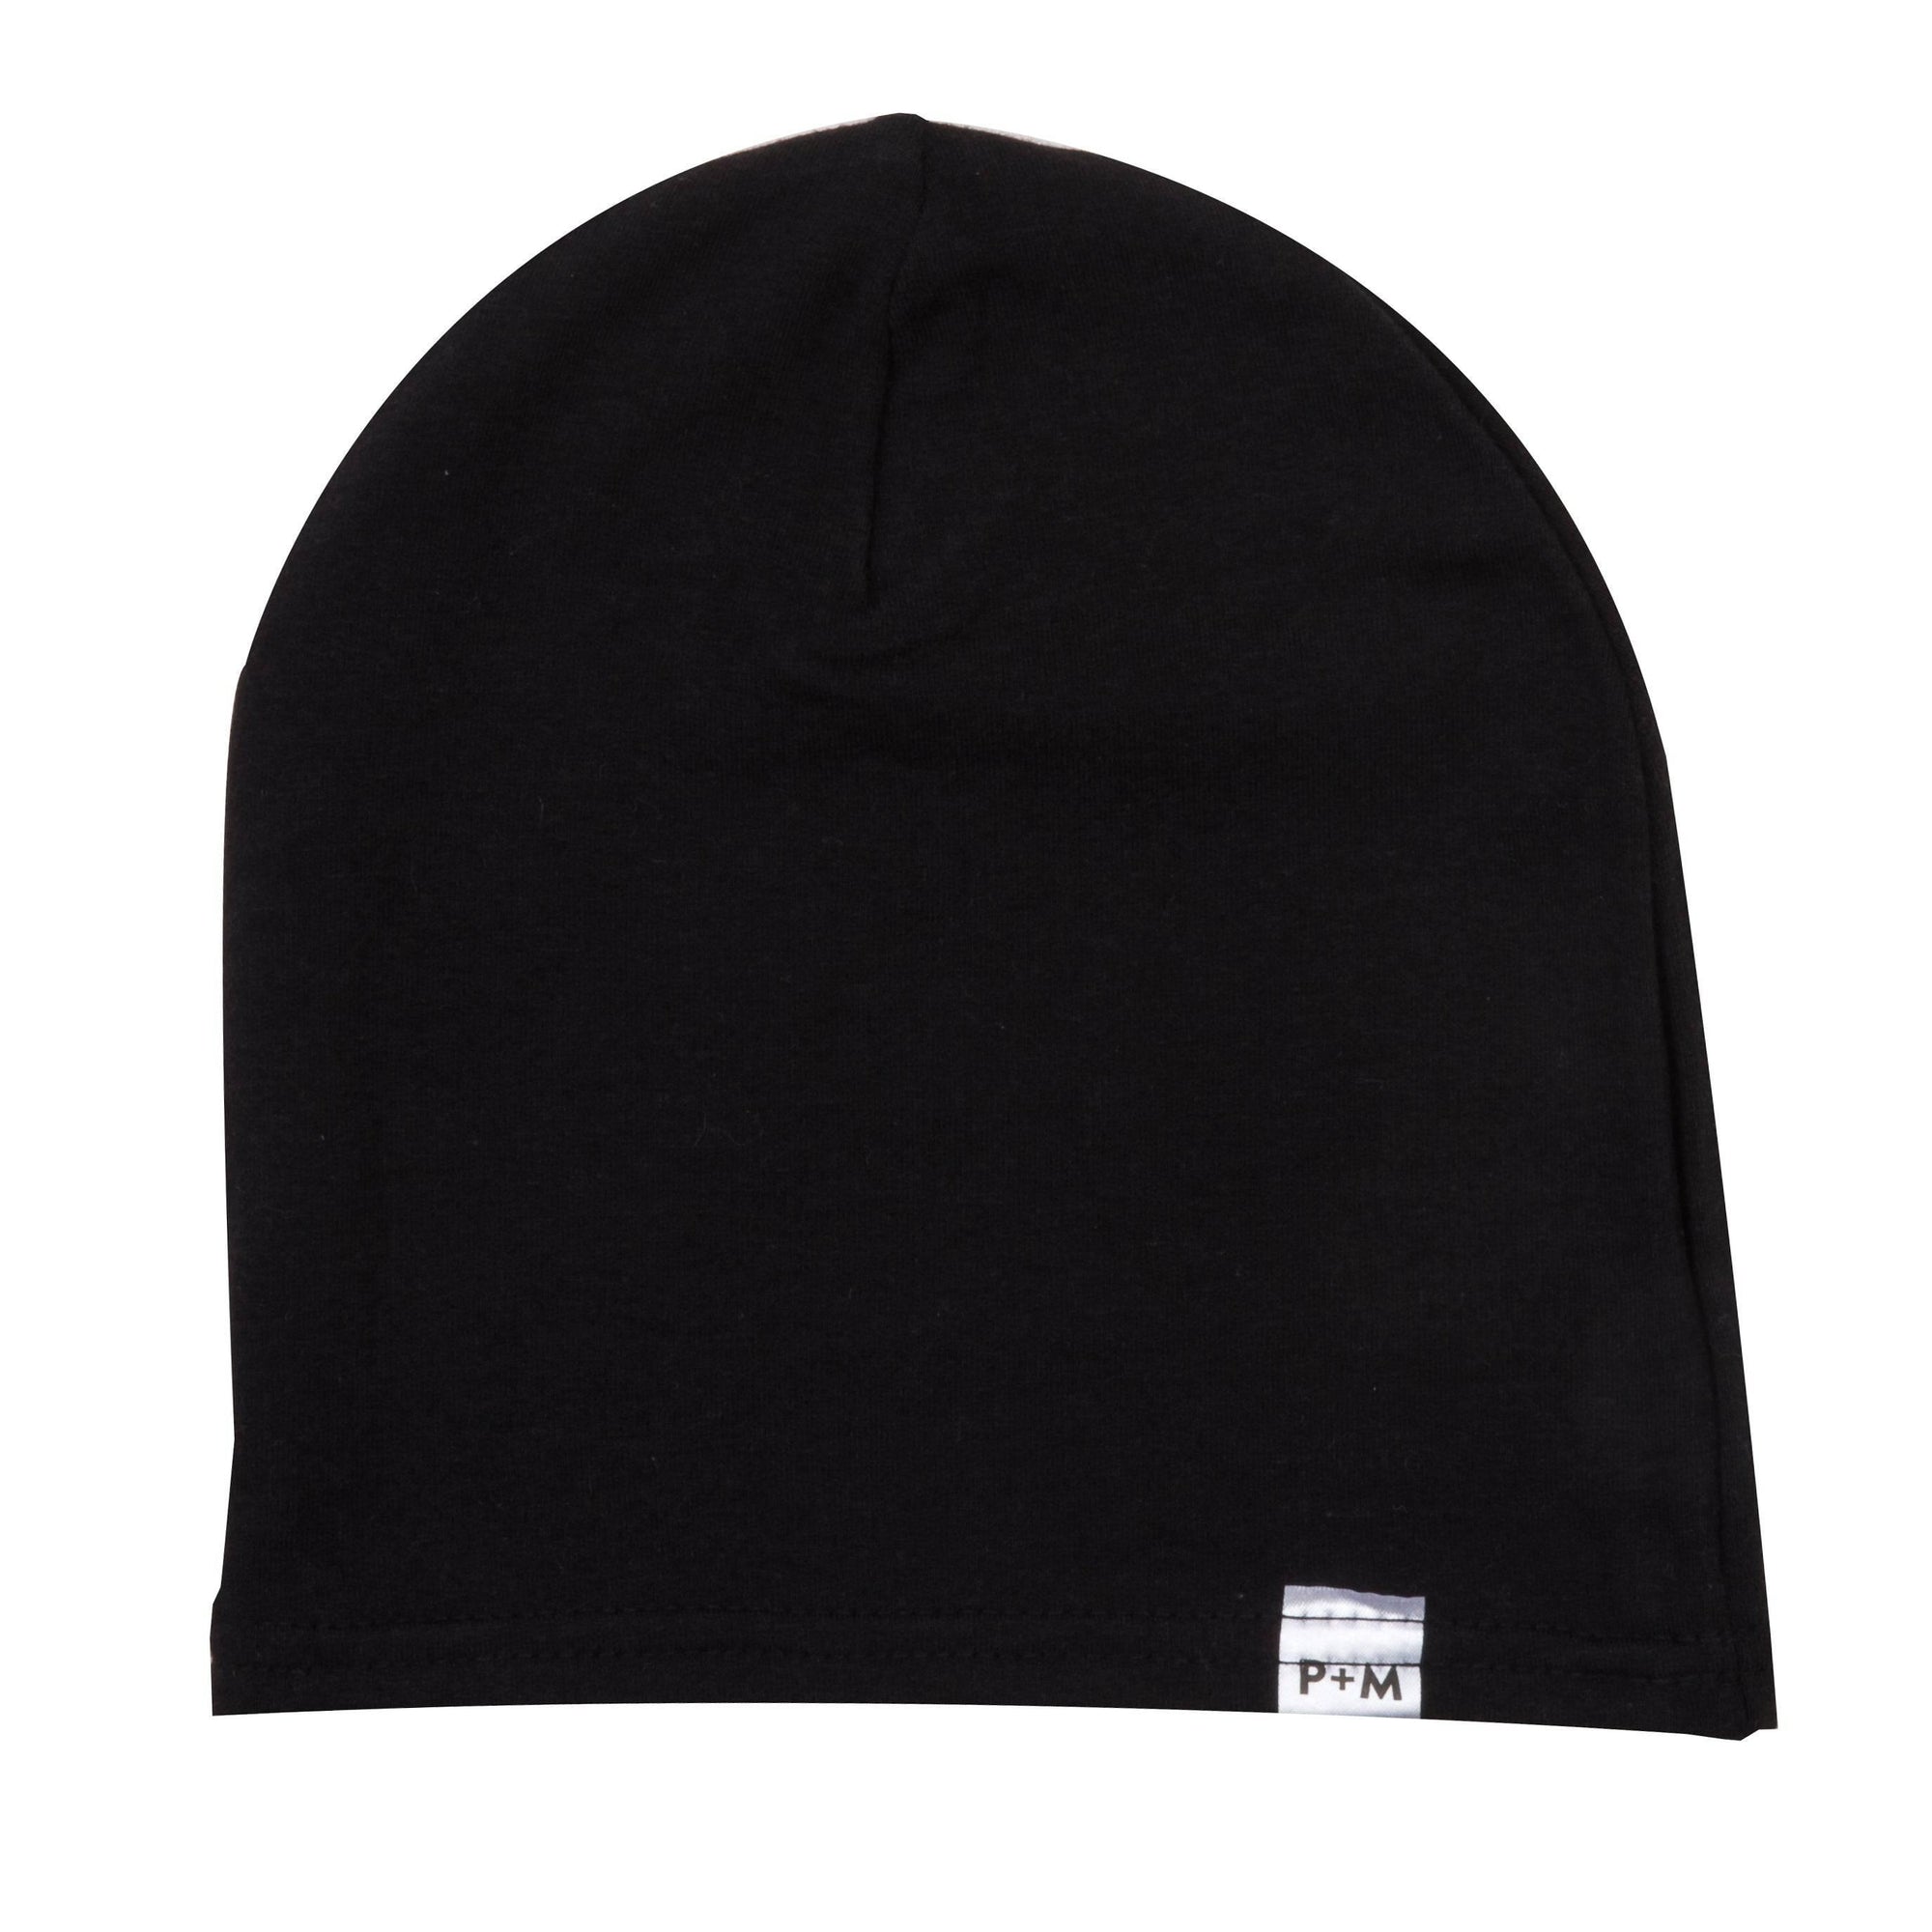 Portage and Main | Children's Beanie Black Hat - All Things Dylan